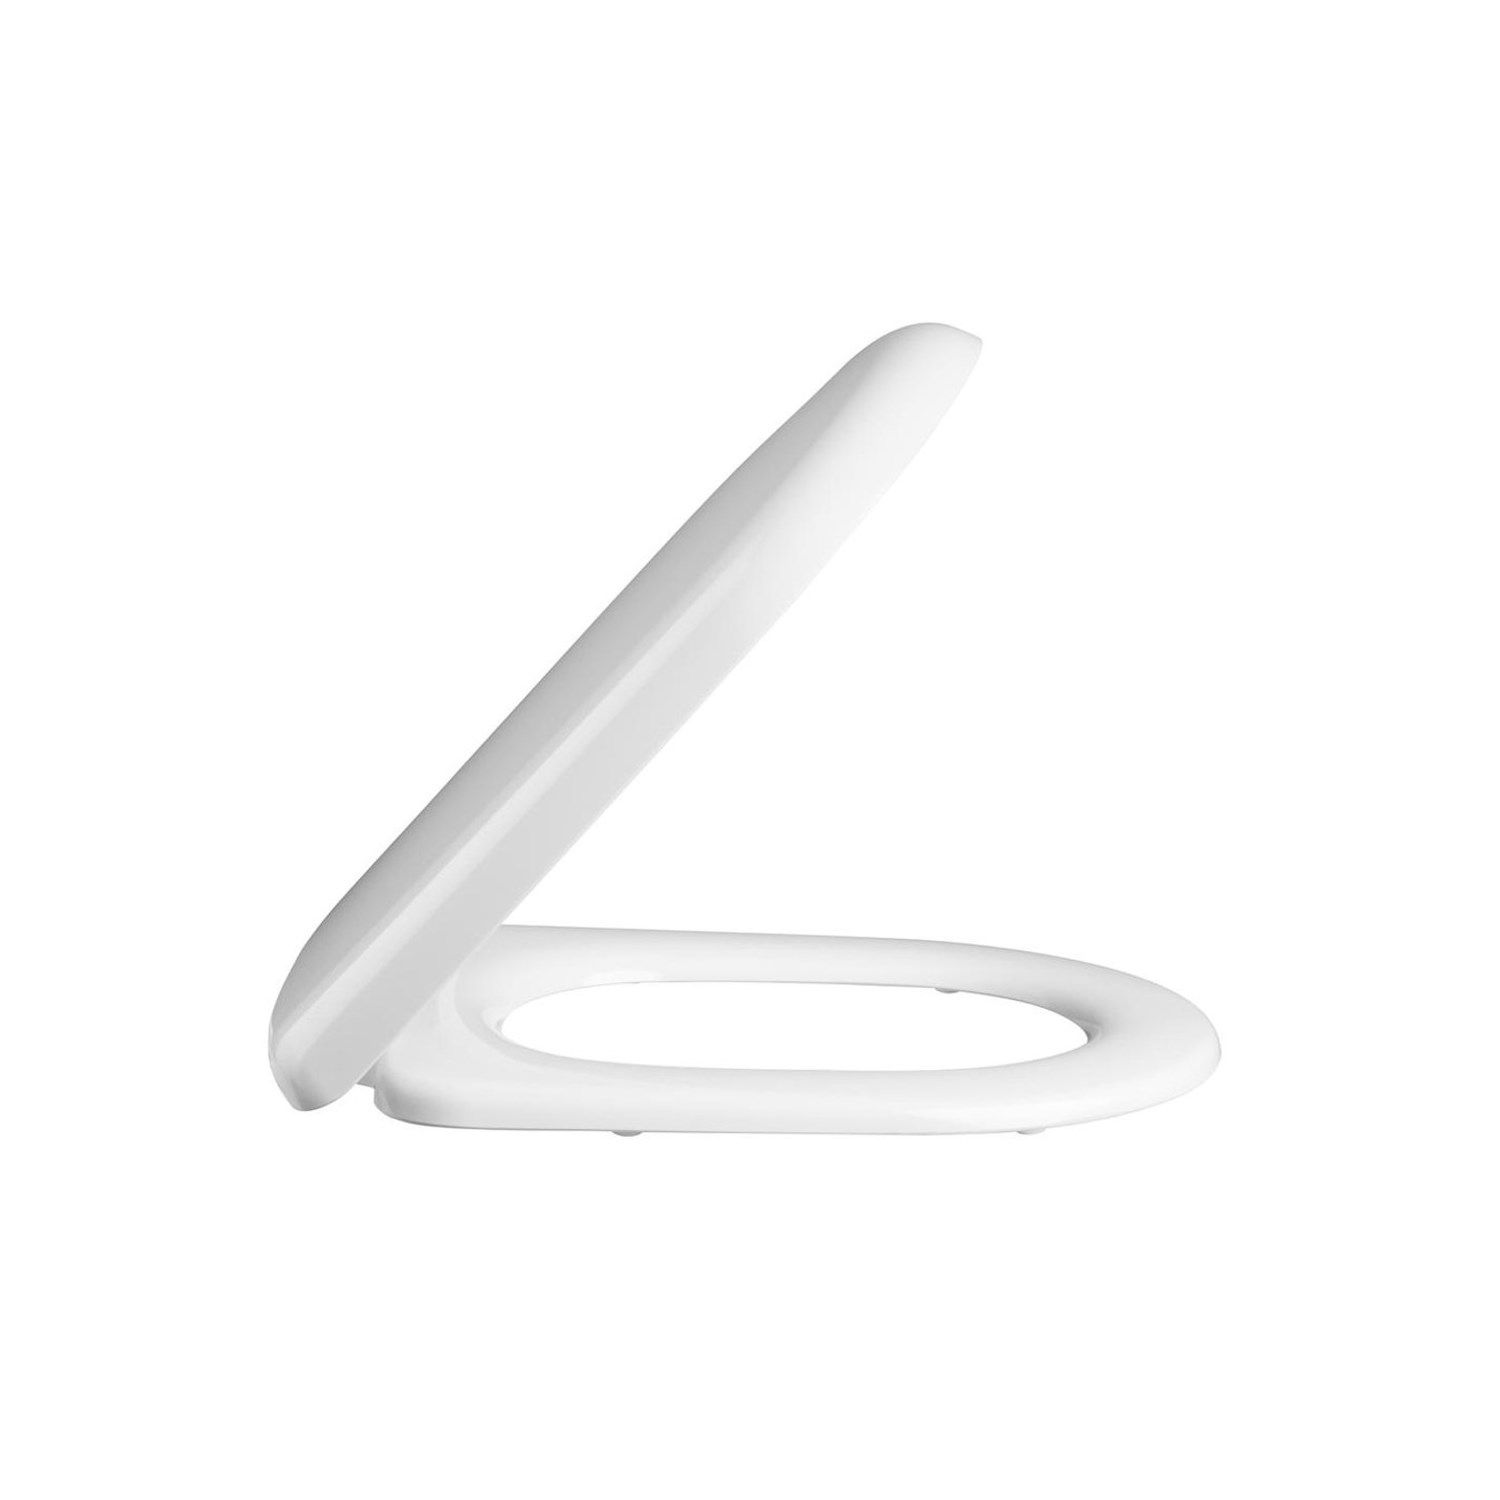 BRAND NEW SEALED BOX D-Shaped Soft-Close Toilet Seat with Quick Release Hinges 